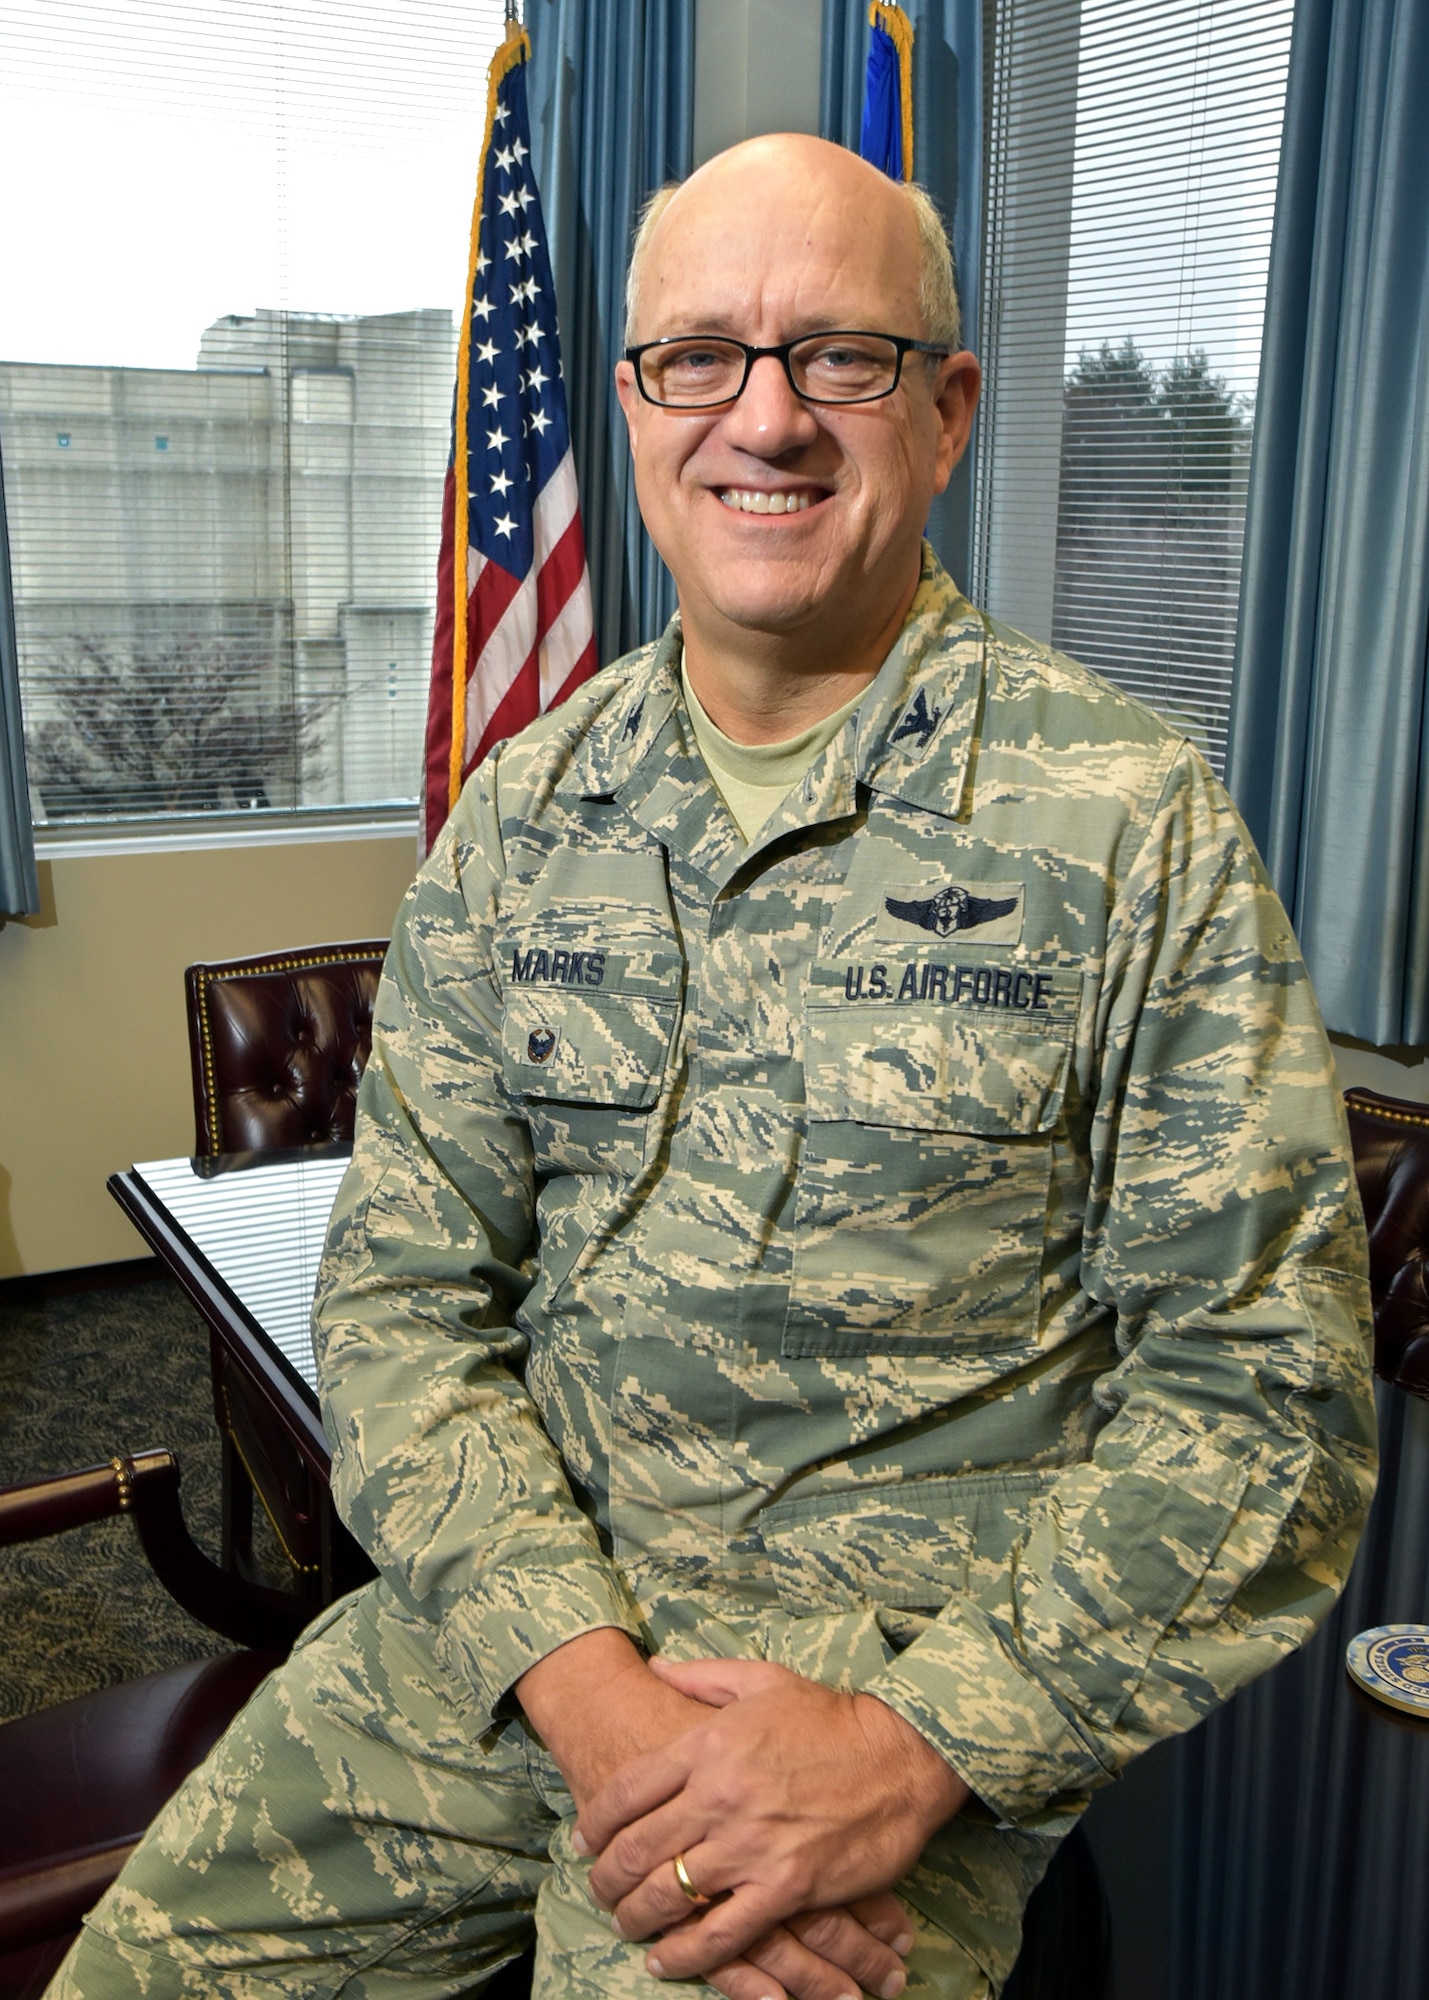 Col. Robert Marks, Air Force Materiel Command surgeon, poses for a photo inside his office at Wright-Patterson Air Force Base, Ohio, Feb. 2, 2018.